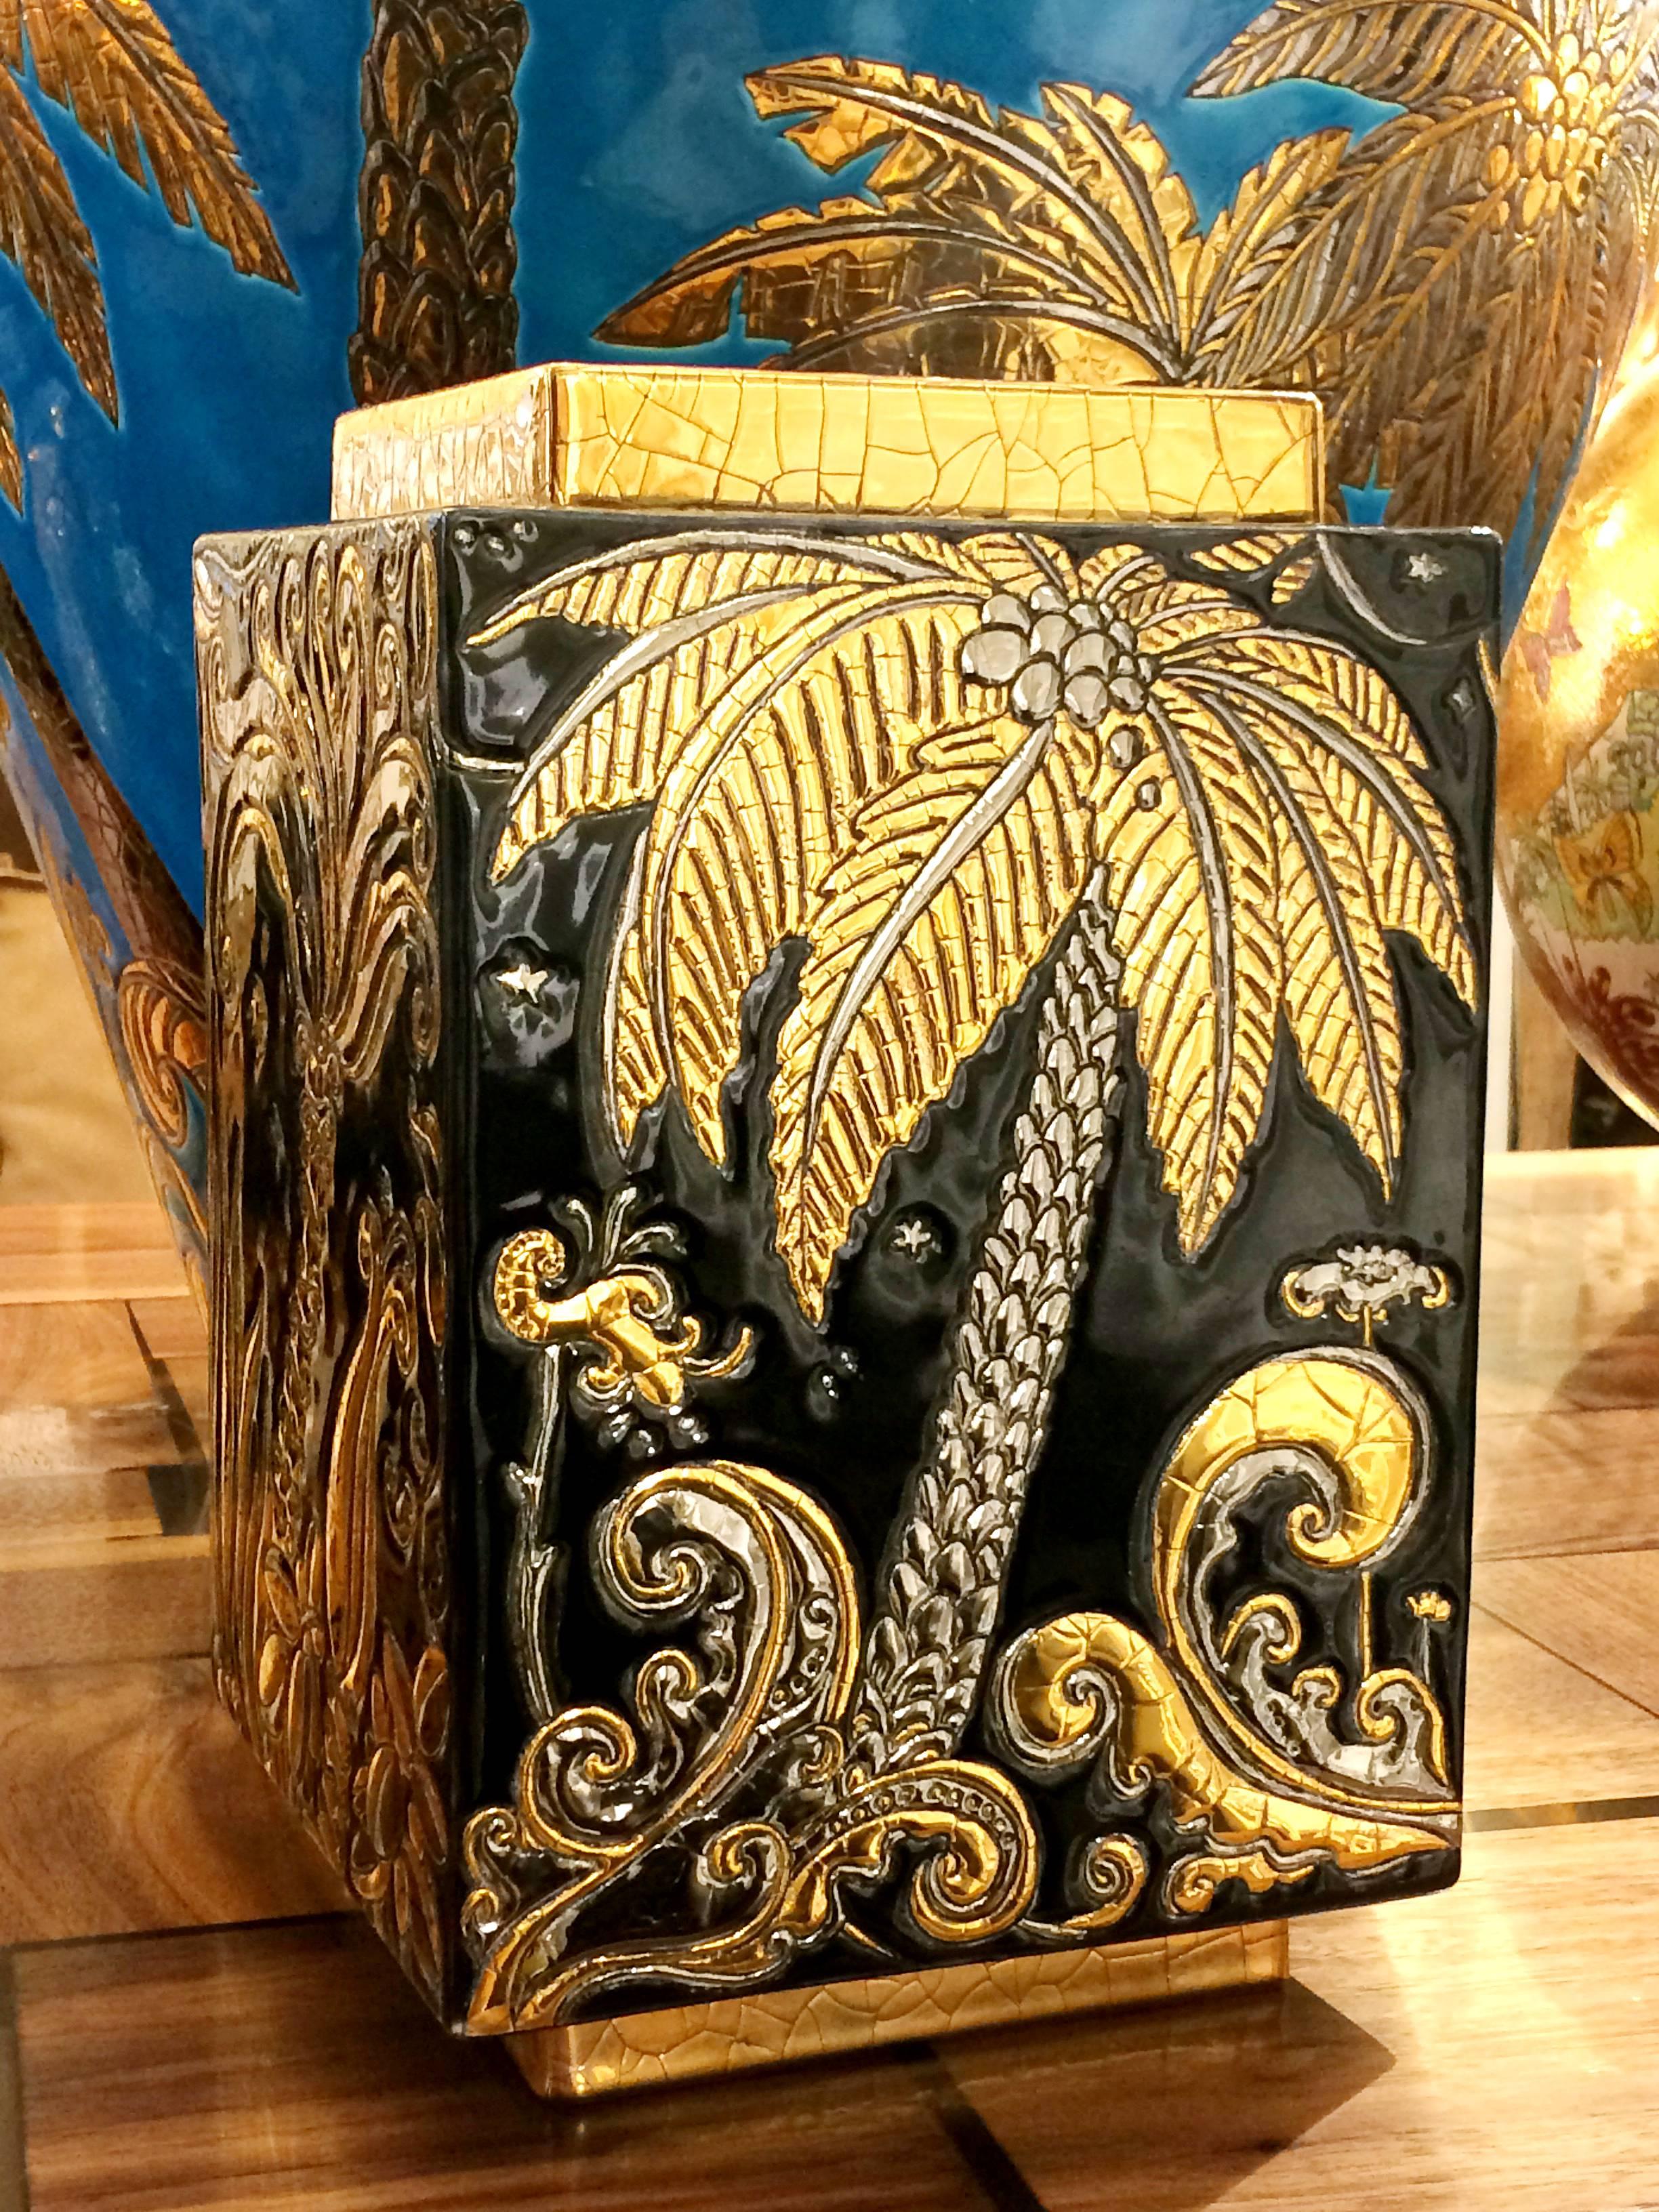 Urn jungle dream black and gold,
Emaux de Longwy from France, 2017
Exceptional piece limited edition 1/100
pieces. Earthenware handcrafted.
